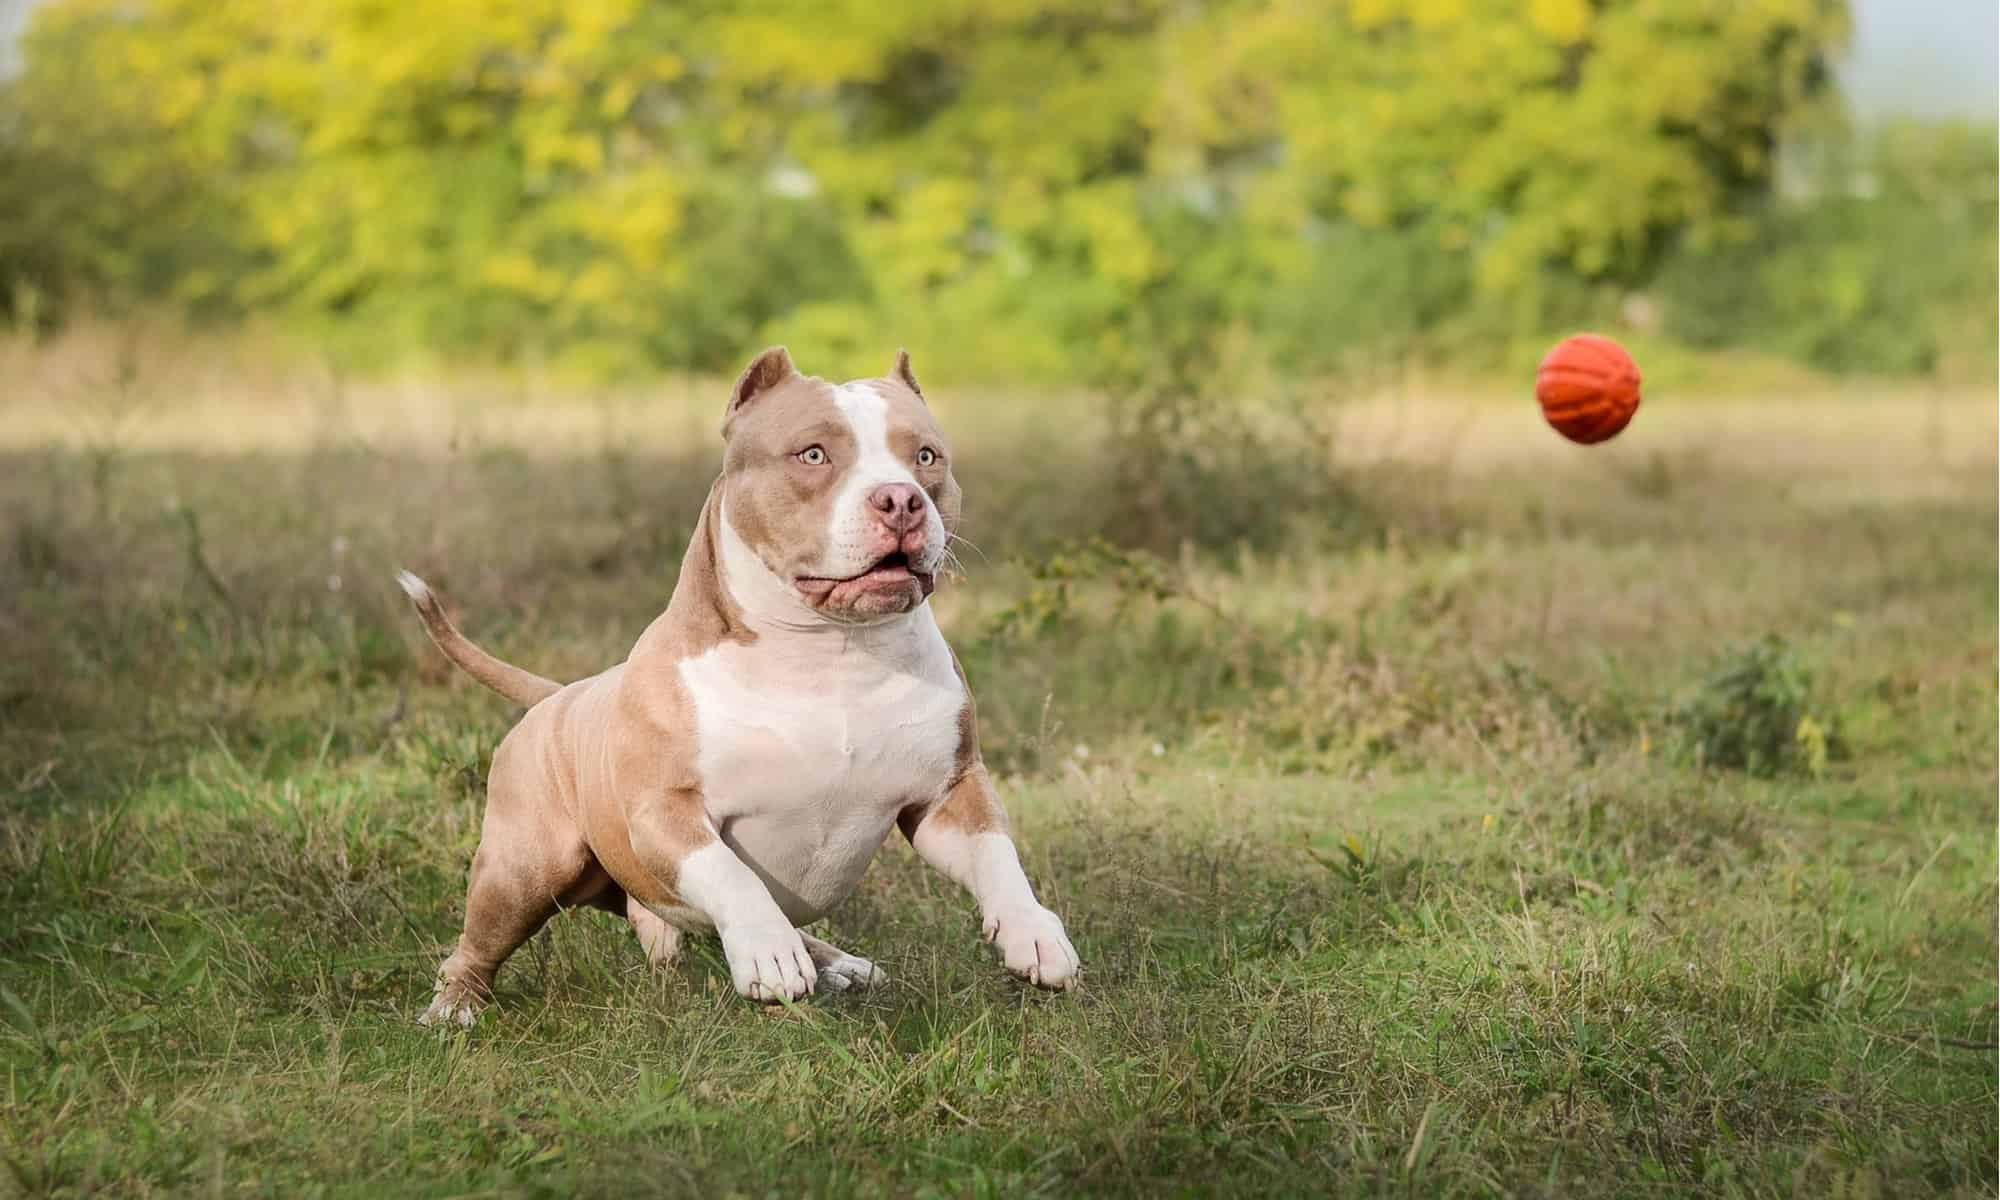 NOT DANGEROUS! THE AMERICAN BULLY DOG 